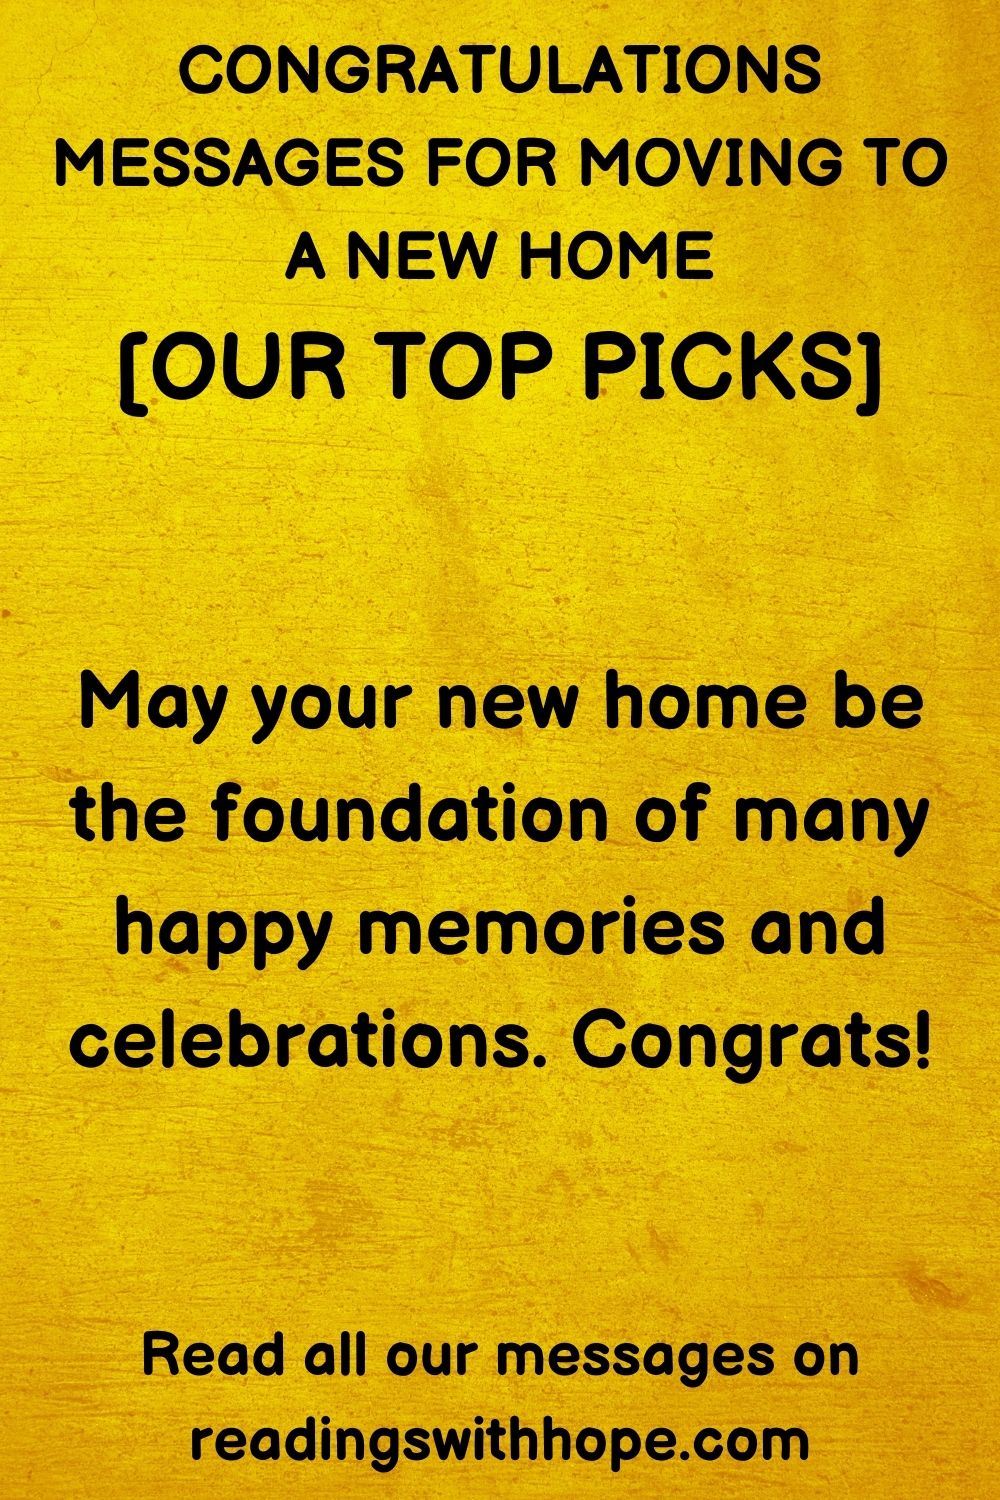 congratulations message for moving to a new home that says May your new home be the foundation of many happy memories and celebrations. Congrats!